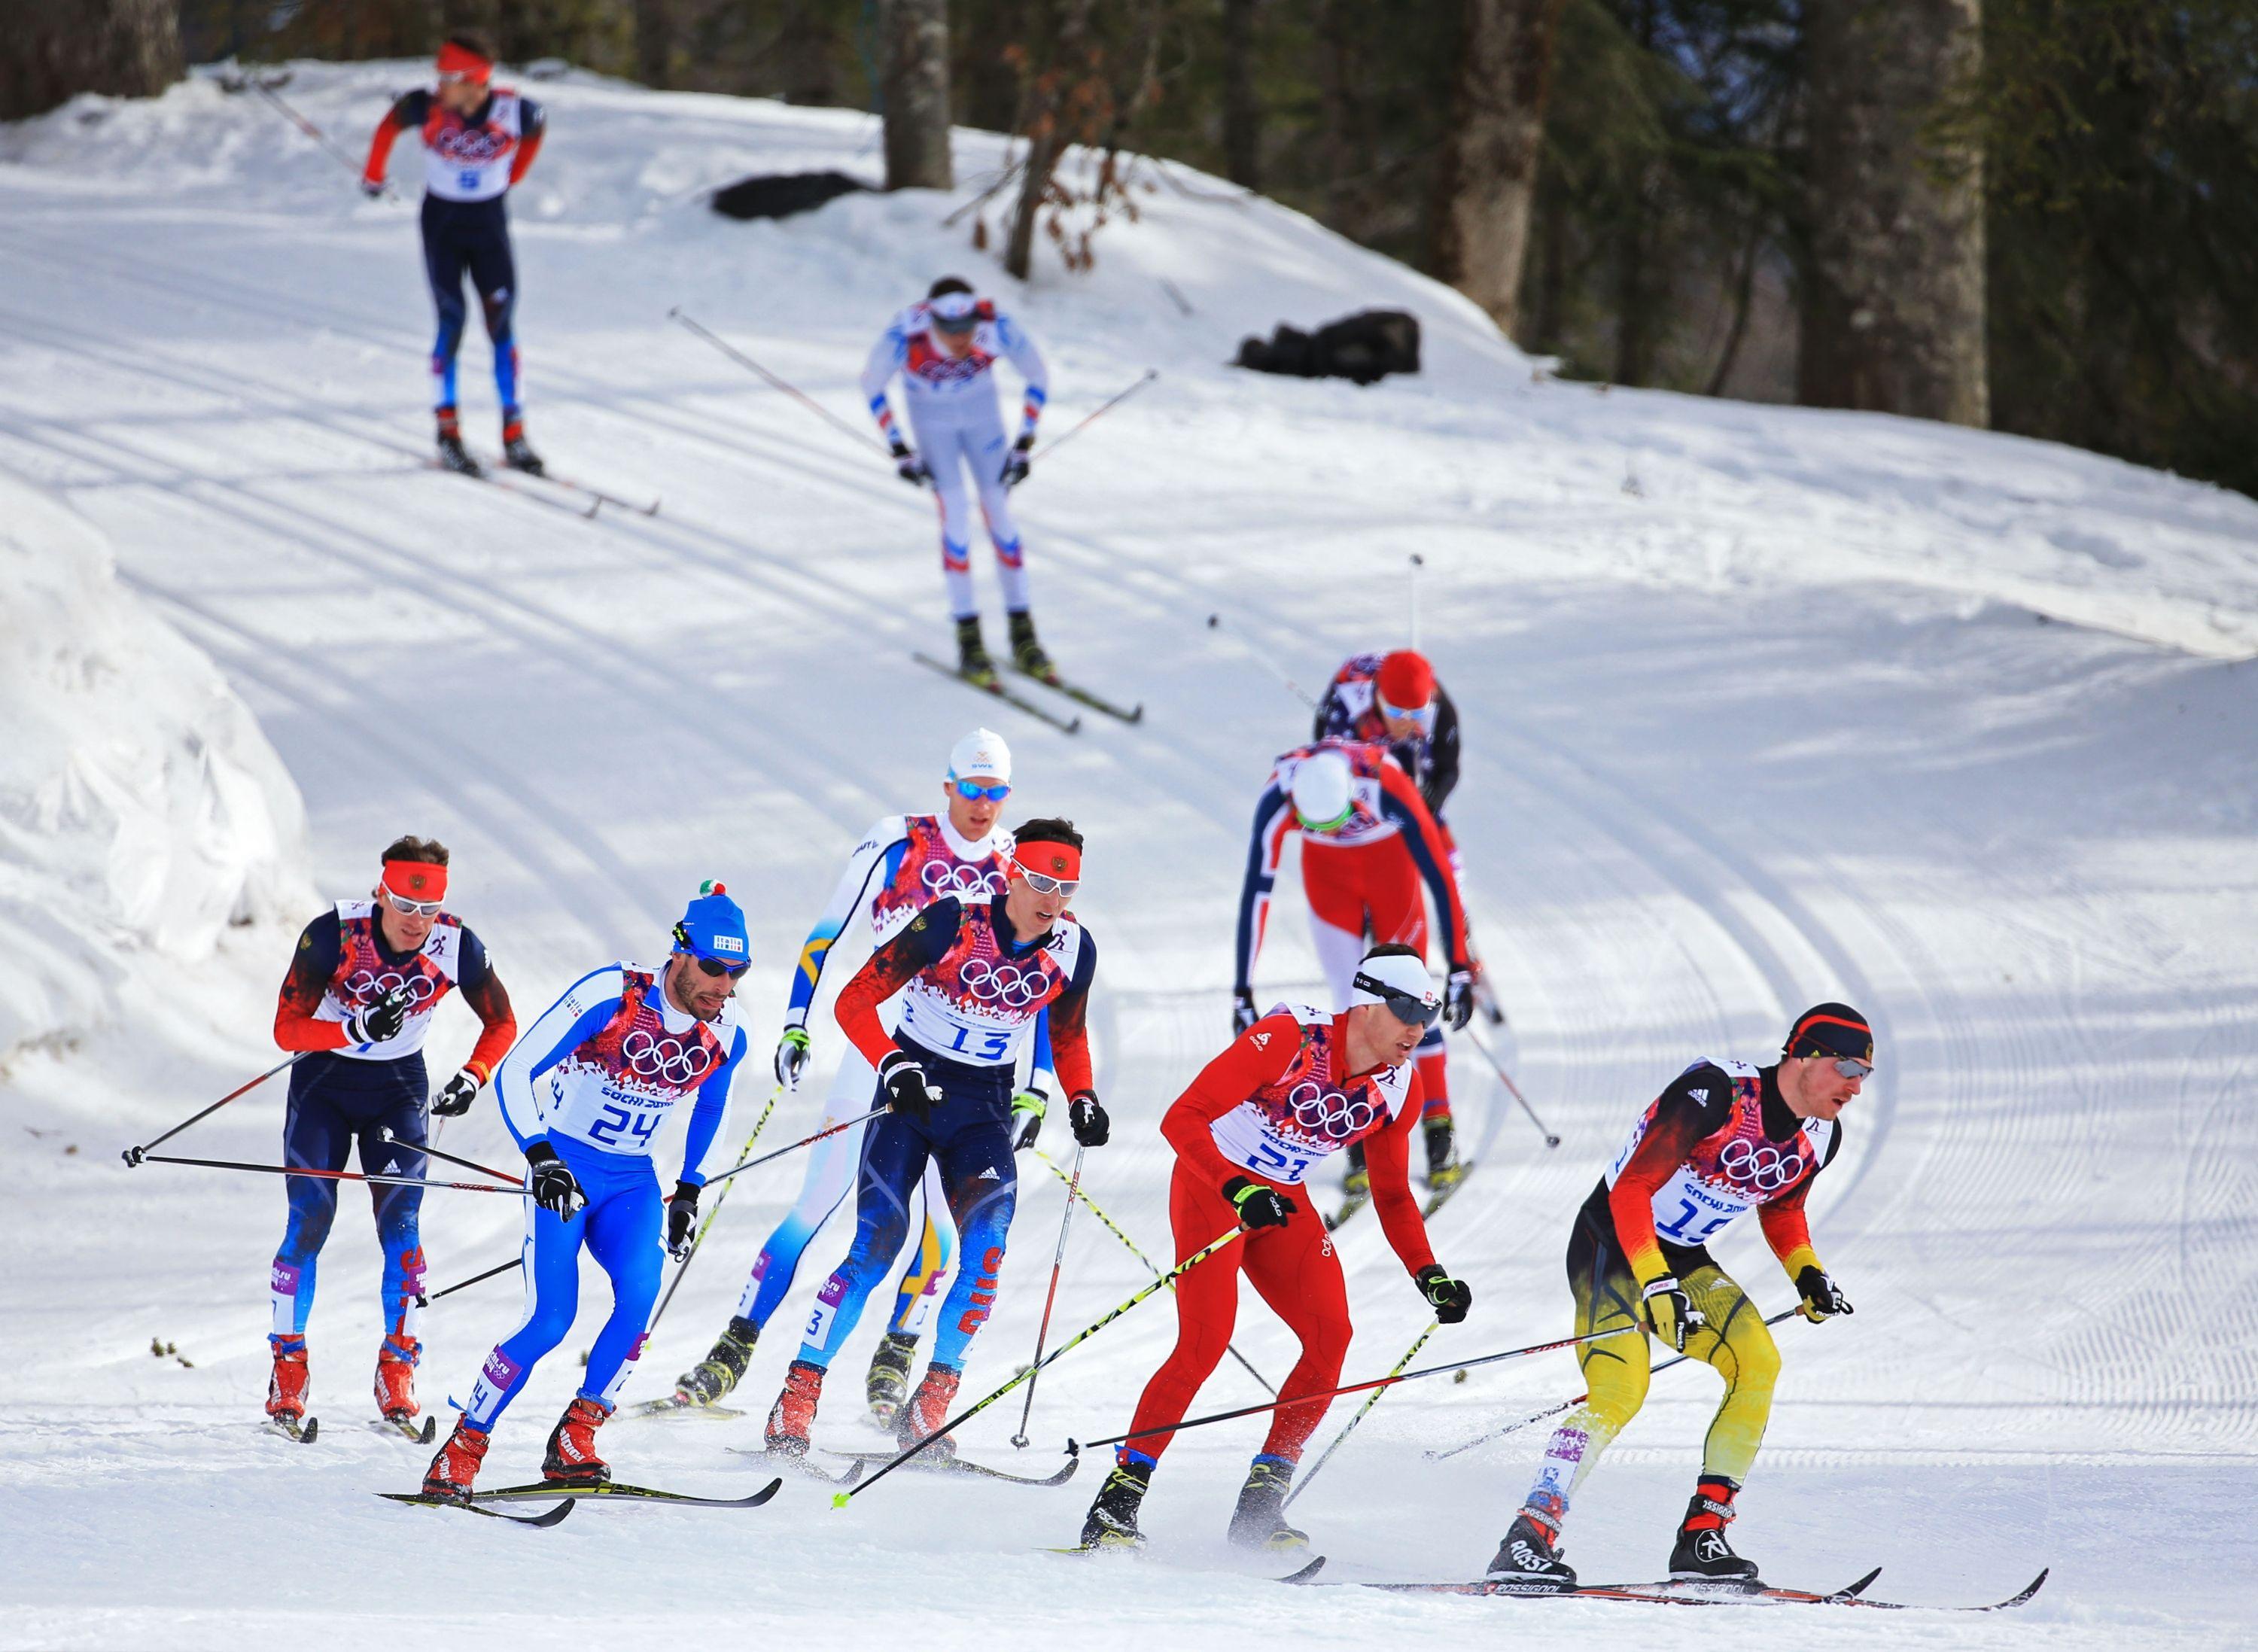 Competition in cross country skiing at the Olympics in Sochi